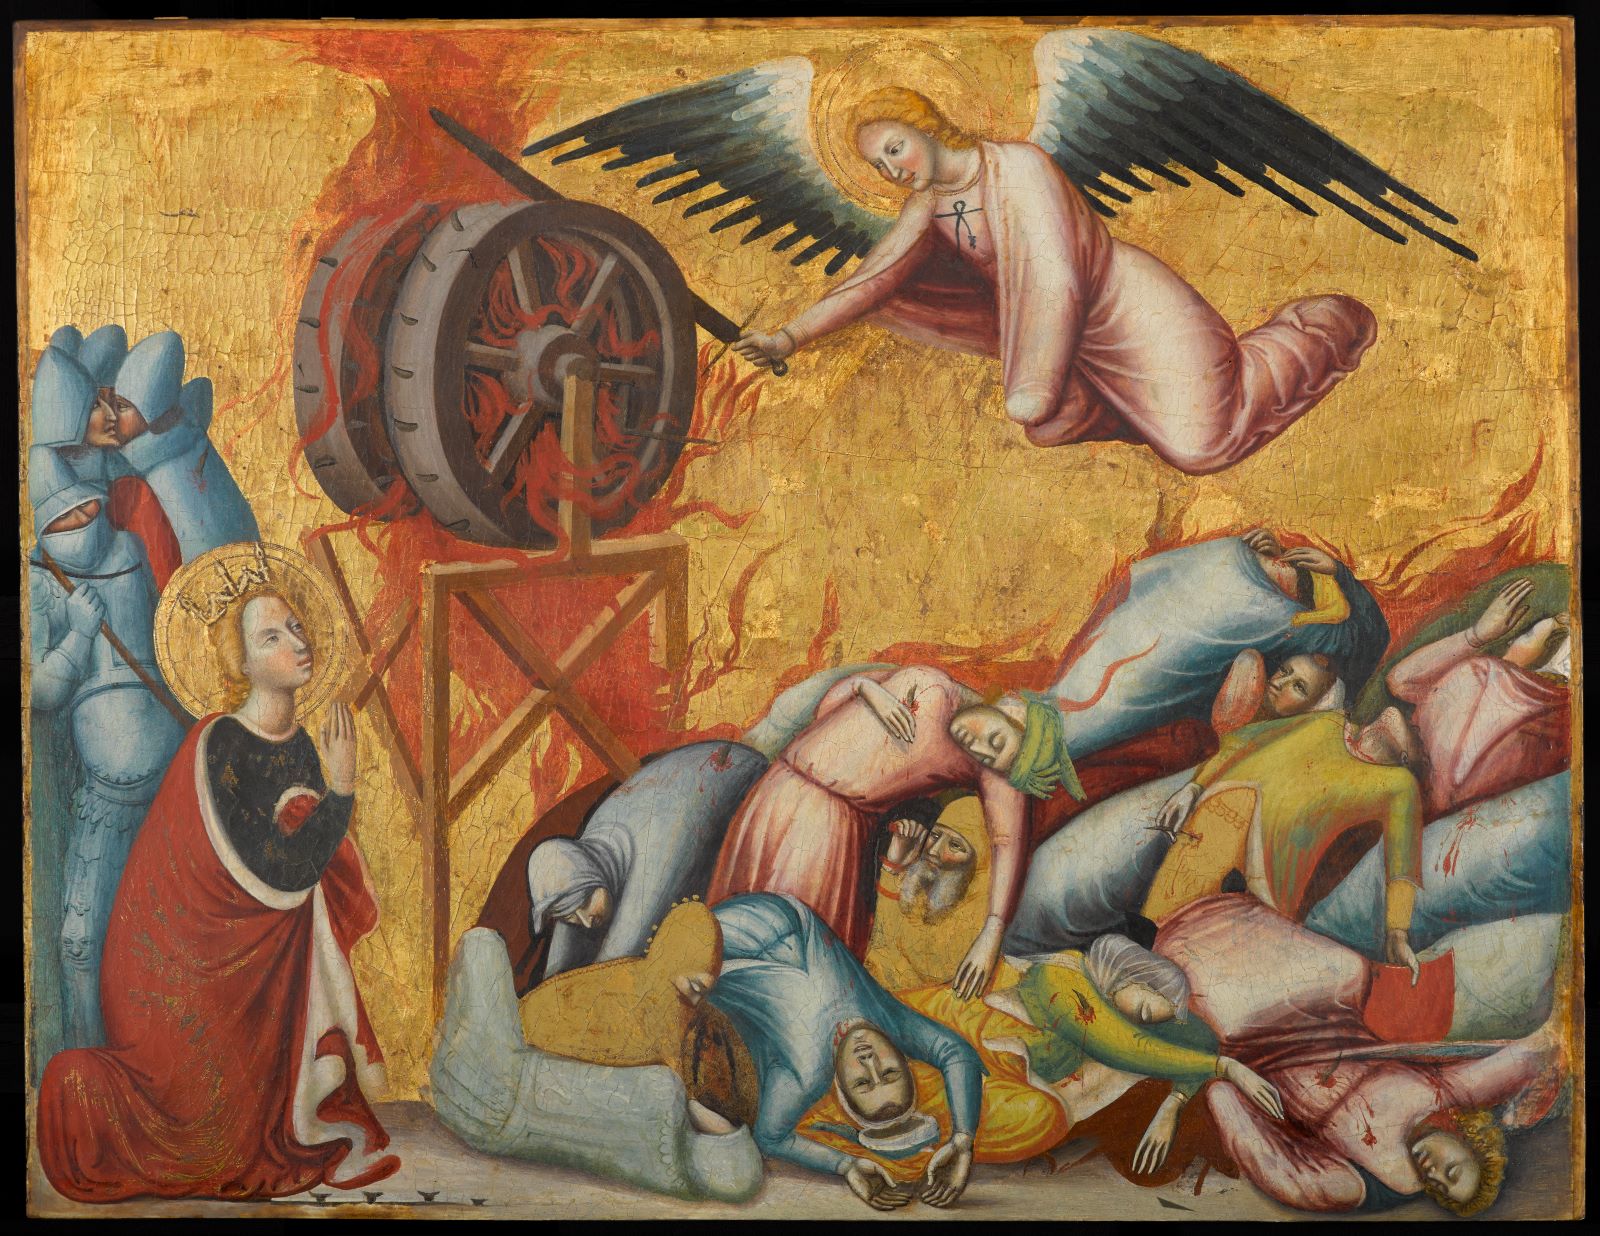 Against a golden background, an angel hovers over bloodied, mortally wounded people as she heats her sword in flames. Saint James wearing a bright red robe and gold crown appears to beseech the angel. A group of mitered figures look huddled in fright.